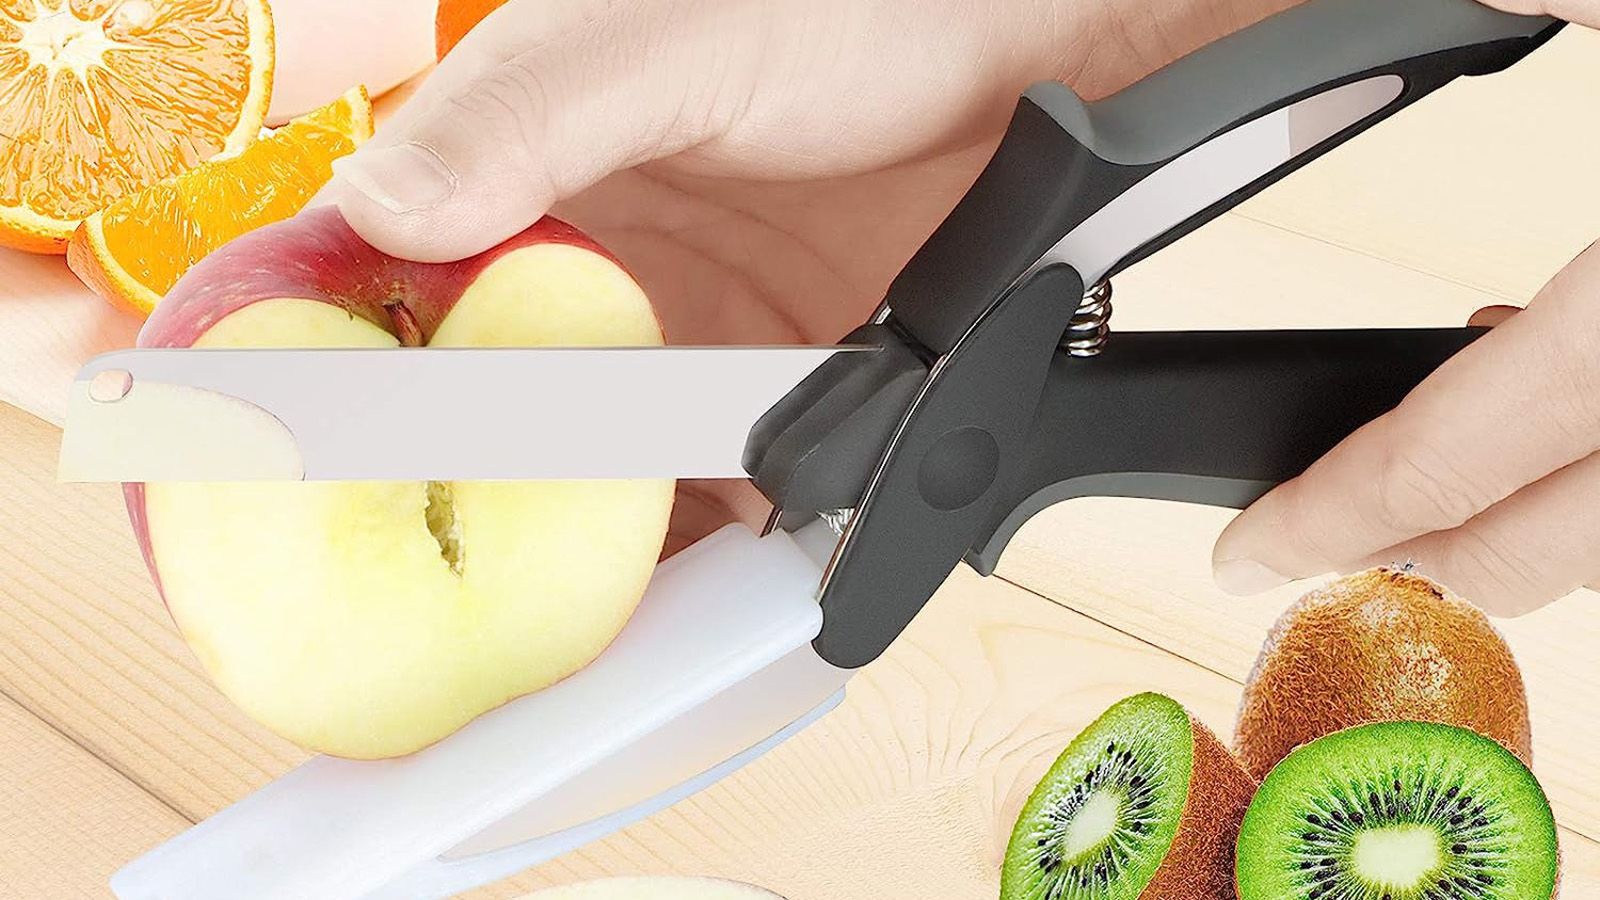 Clever Cutter 2-in-1 Food Chopper Kitchen Knife and Cutting Board Scissors  Vegetable Fruit Slicer  